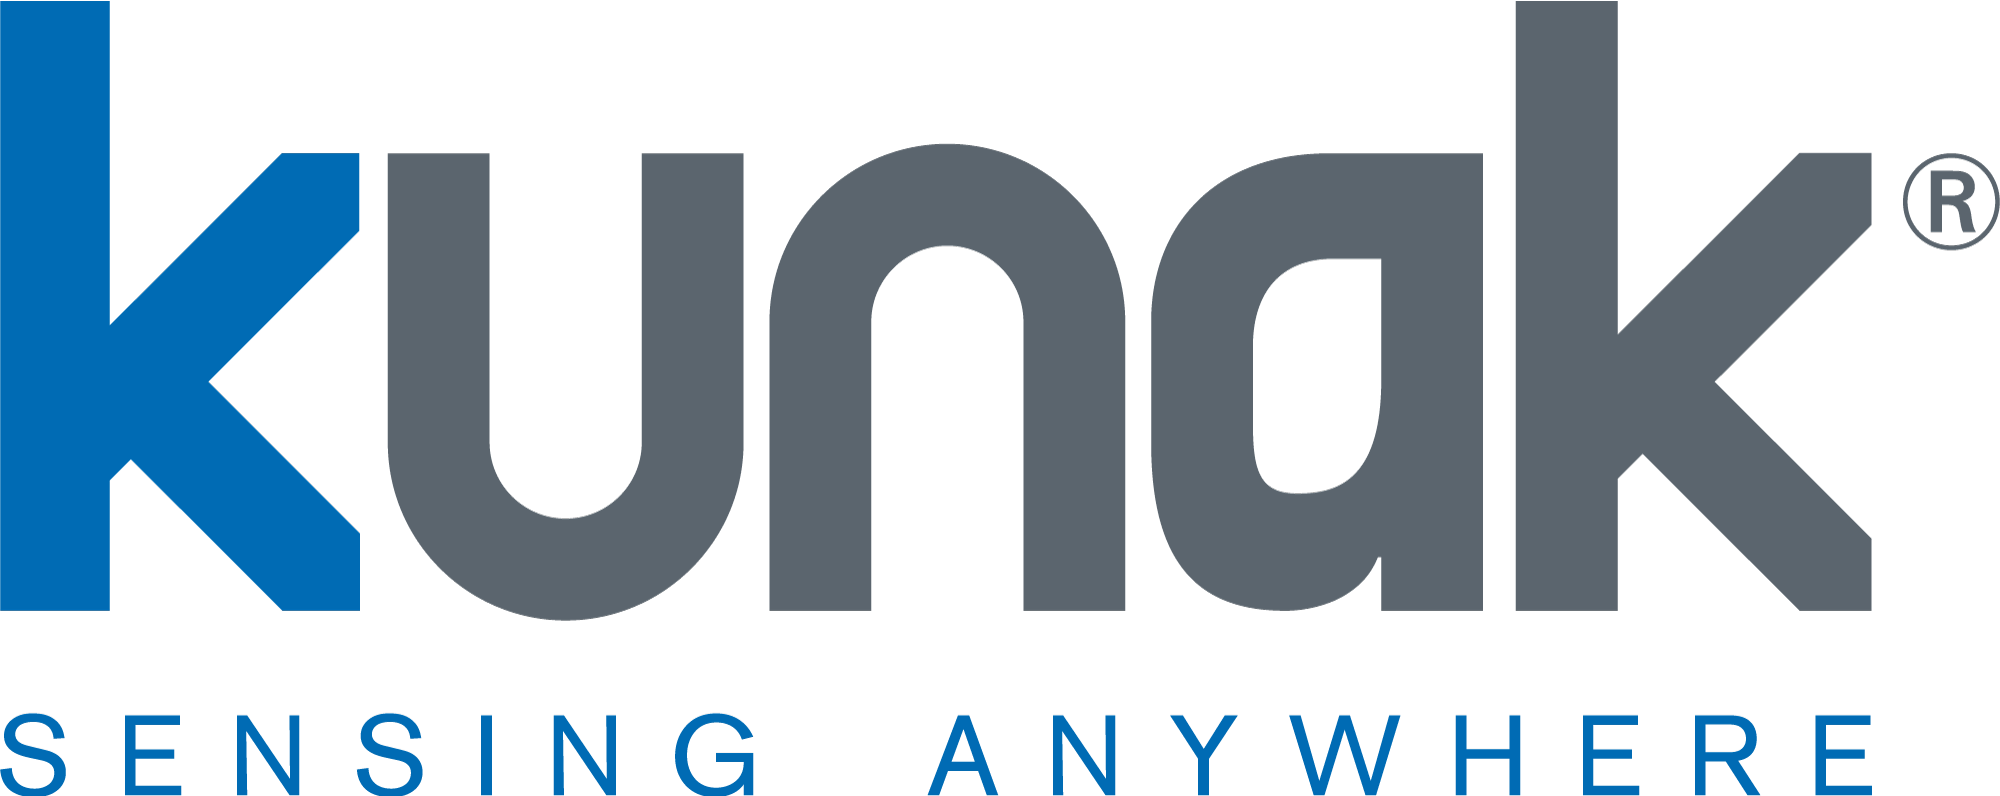 Kunak AIR Pro: Manage air quality with large and accurate data thanks to the revolutionary sensor-based air quality monitor for professionals